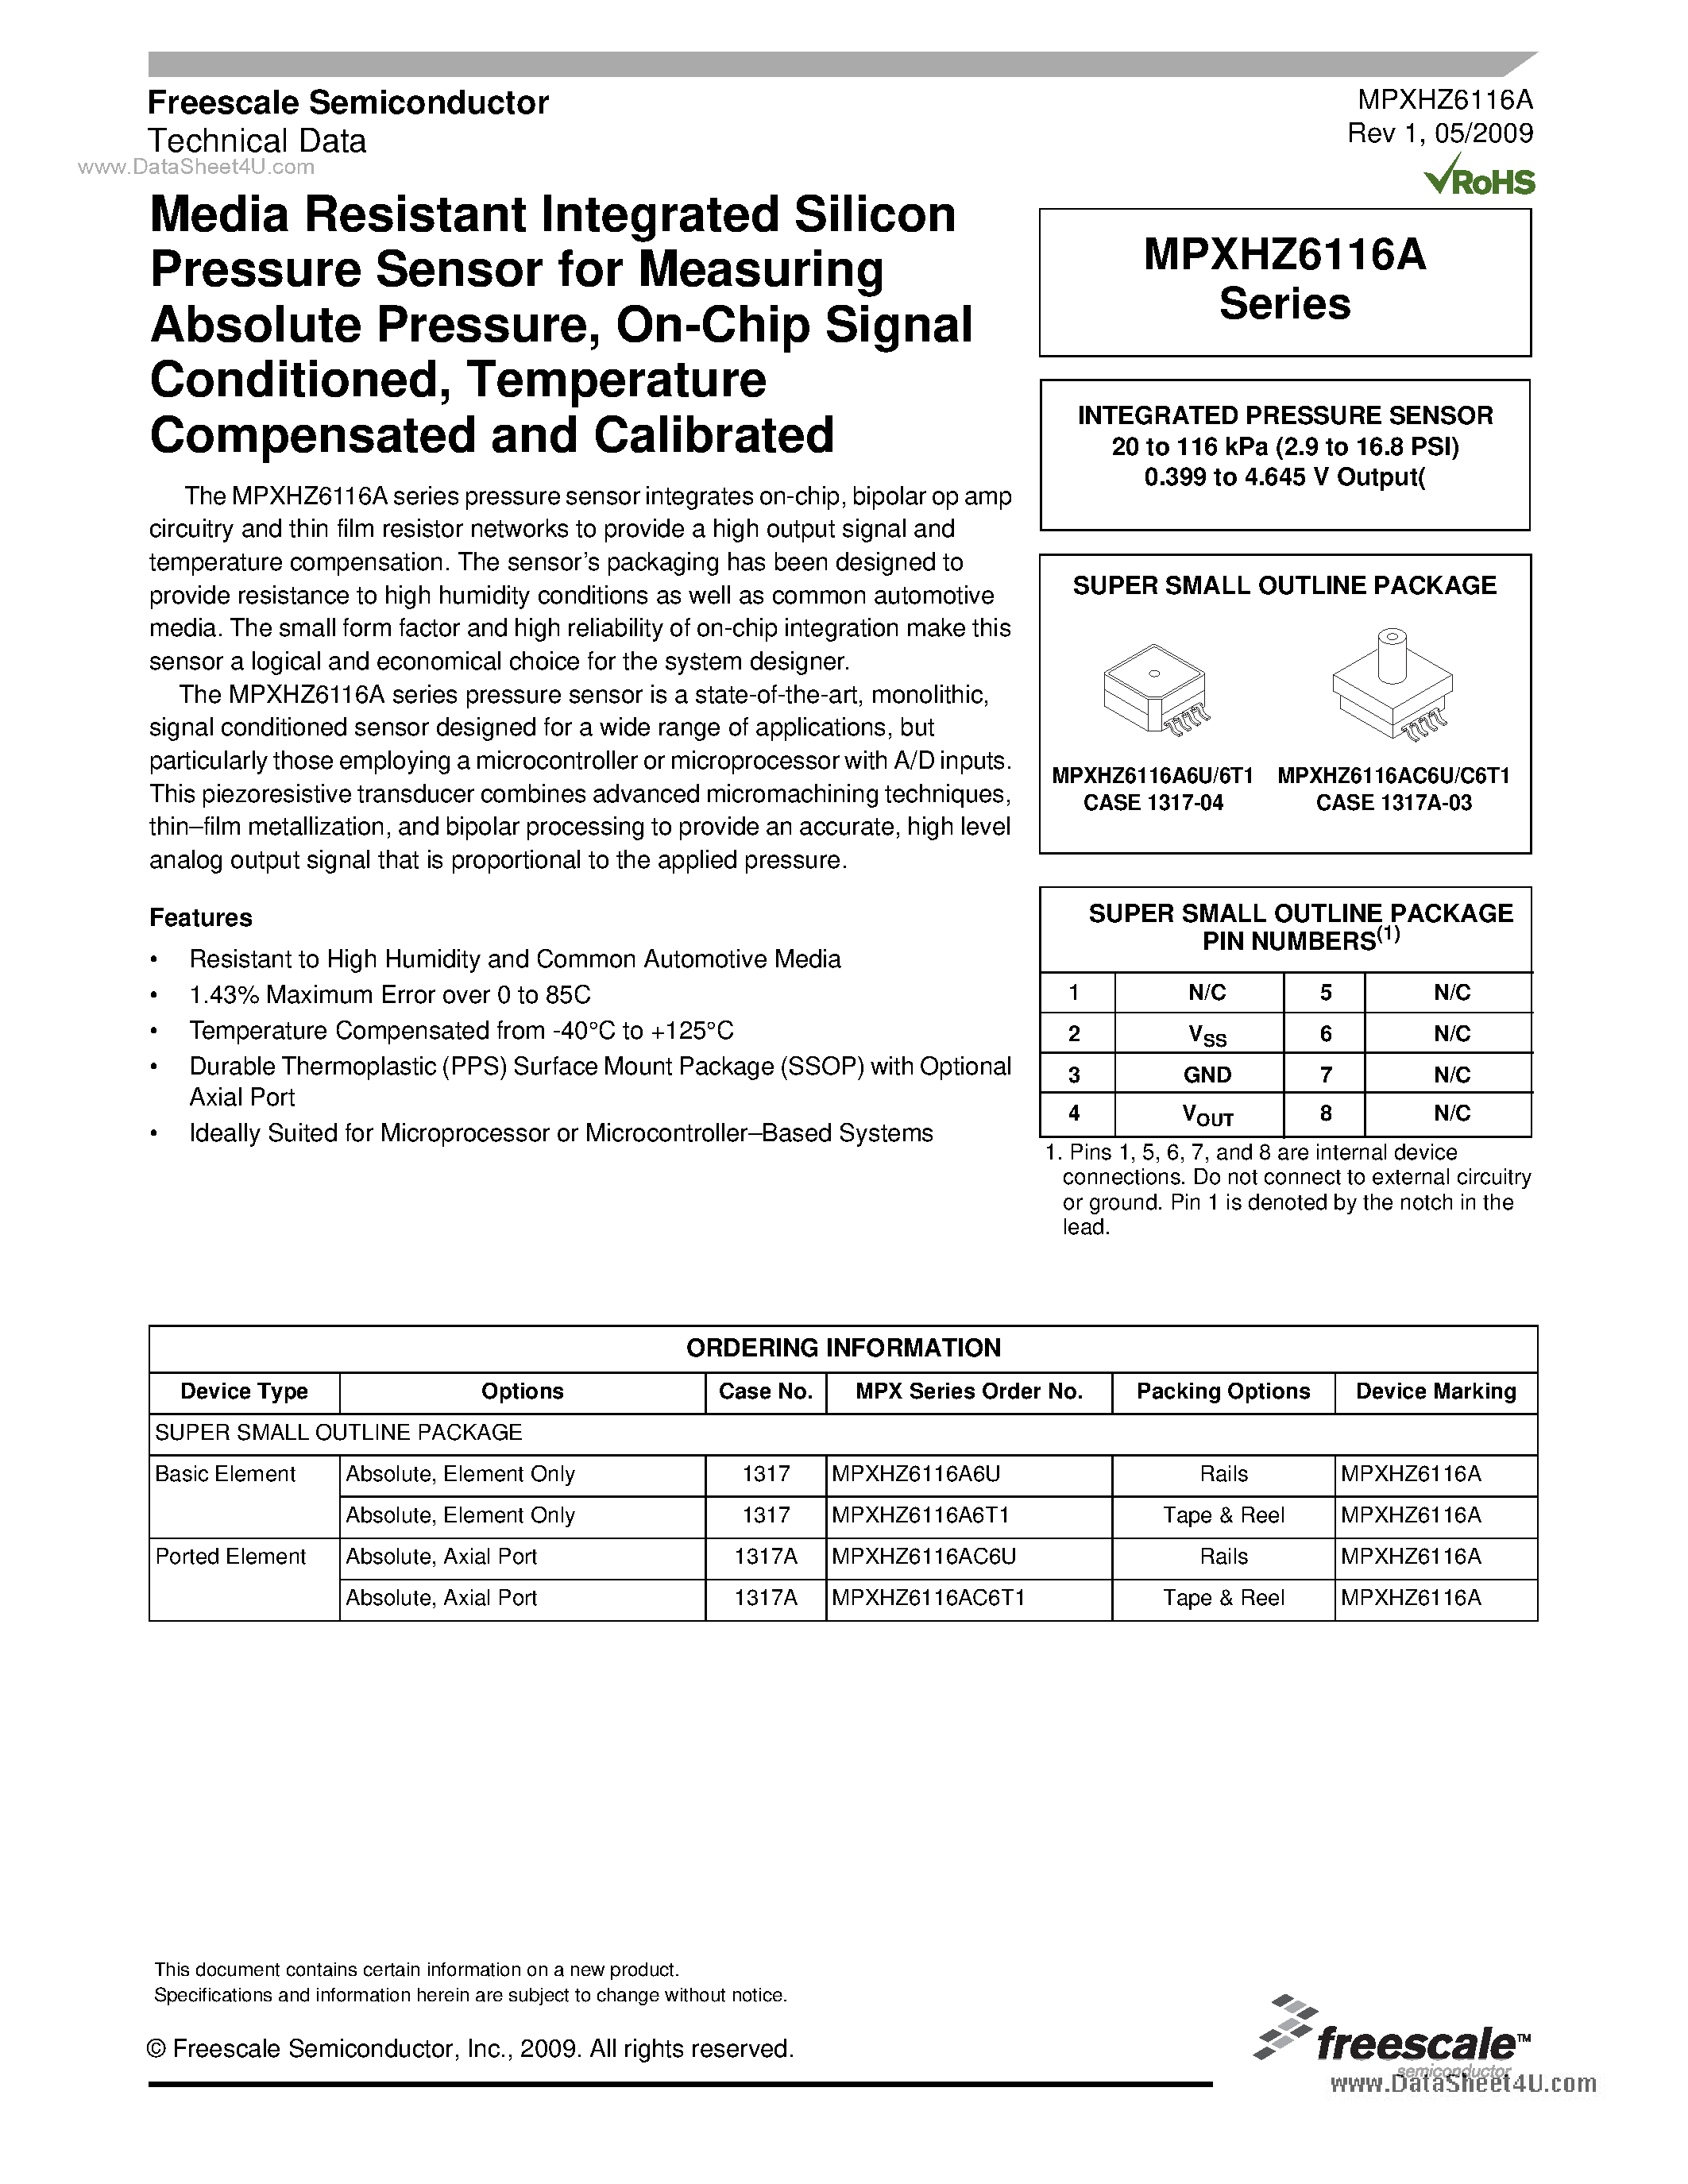 Datasheet MPXHZ6116A - Media Resistant Integrated Silicon page 1